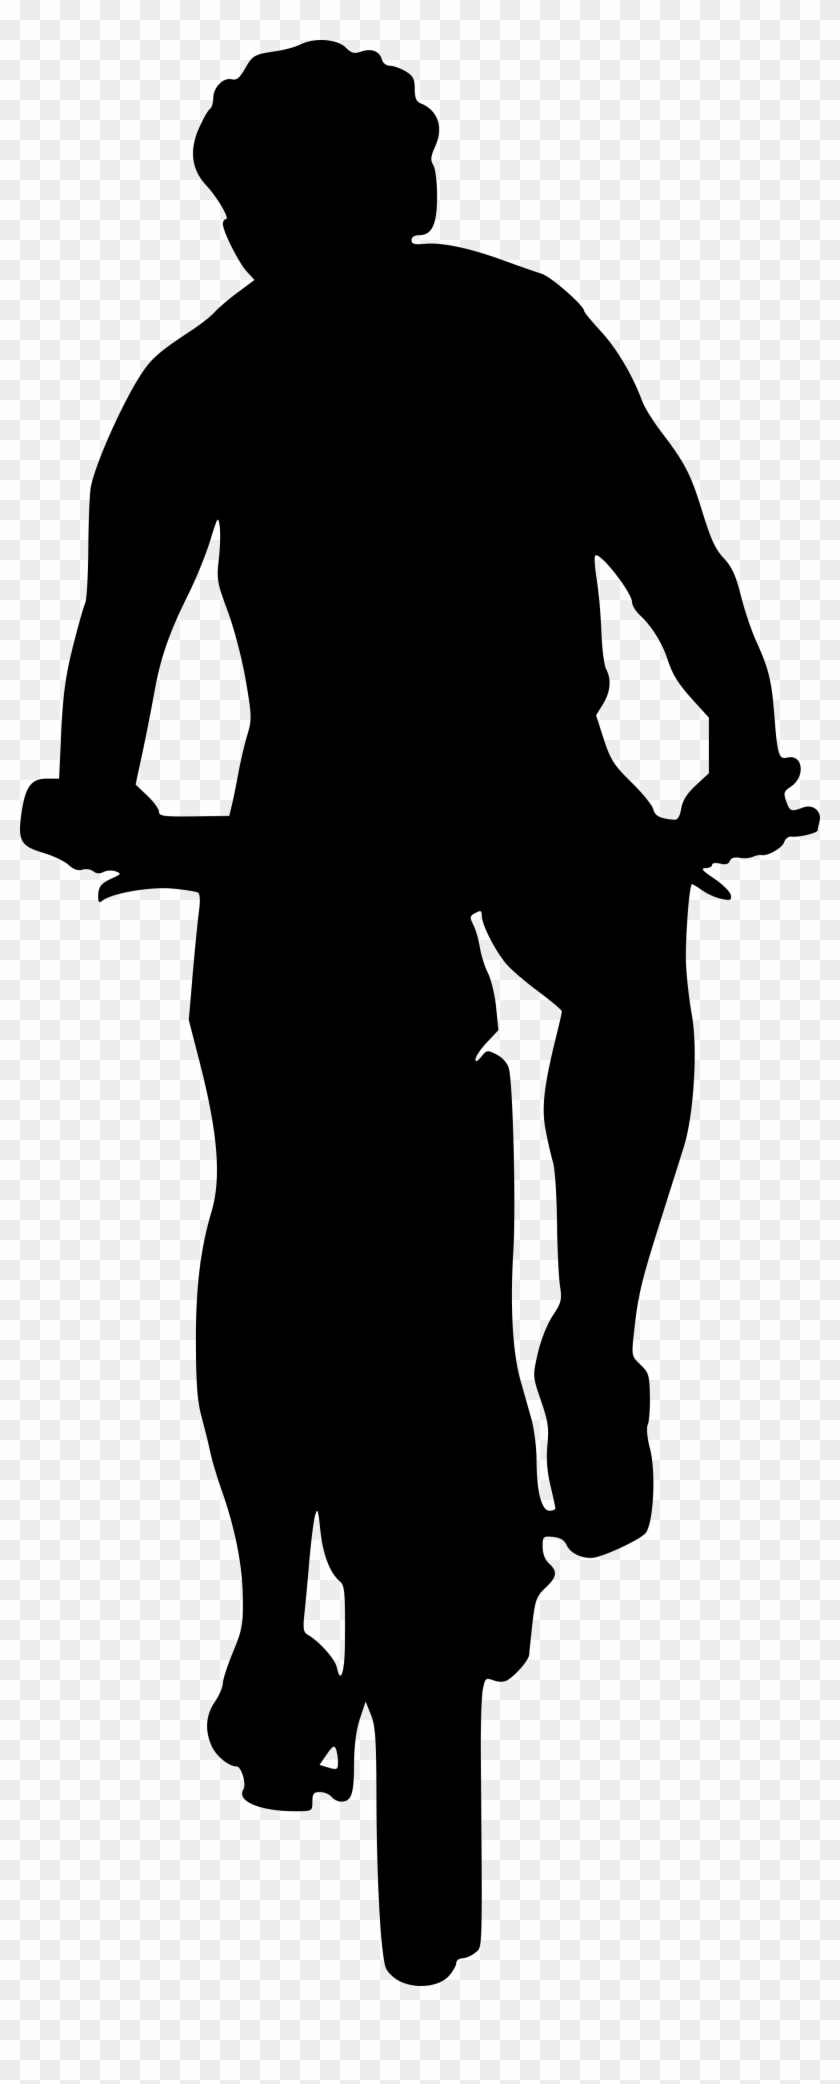 Silhouette Front - James Bond Silhouette Png #441119